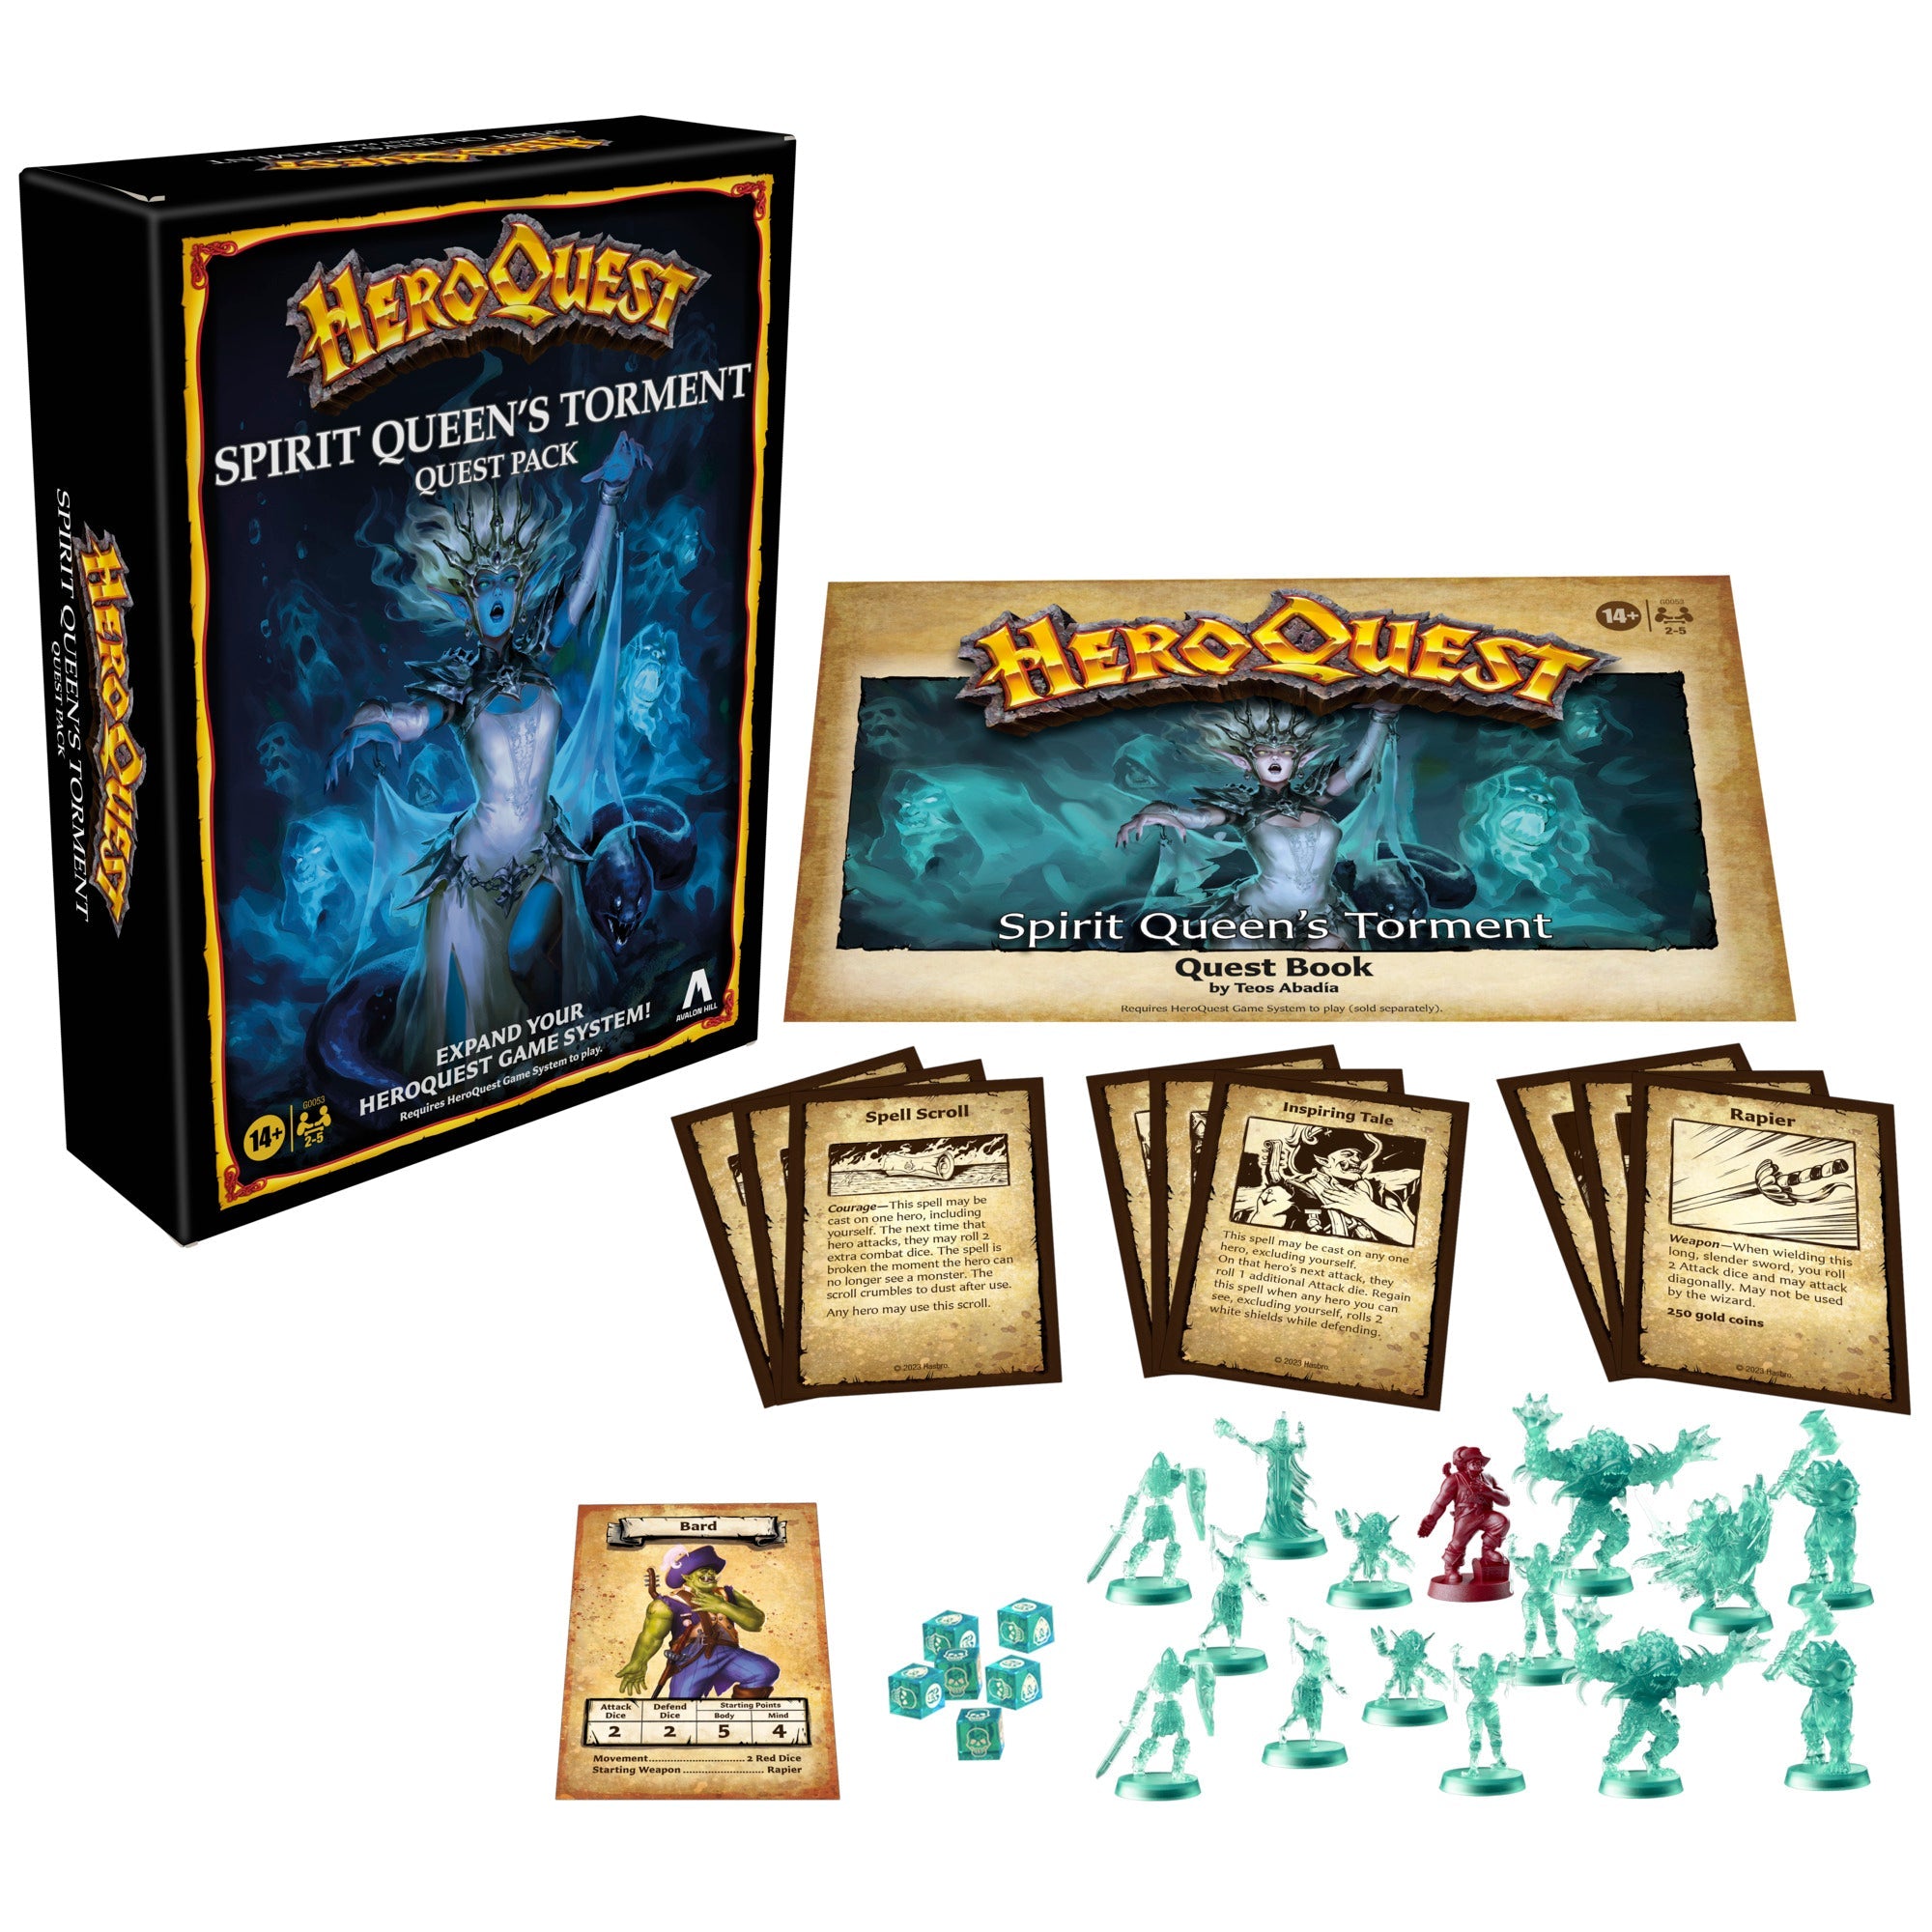 The HeroQuest board game is coming back: Here's how to pre-order - Polygon